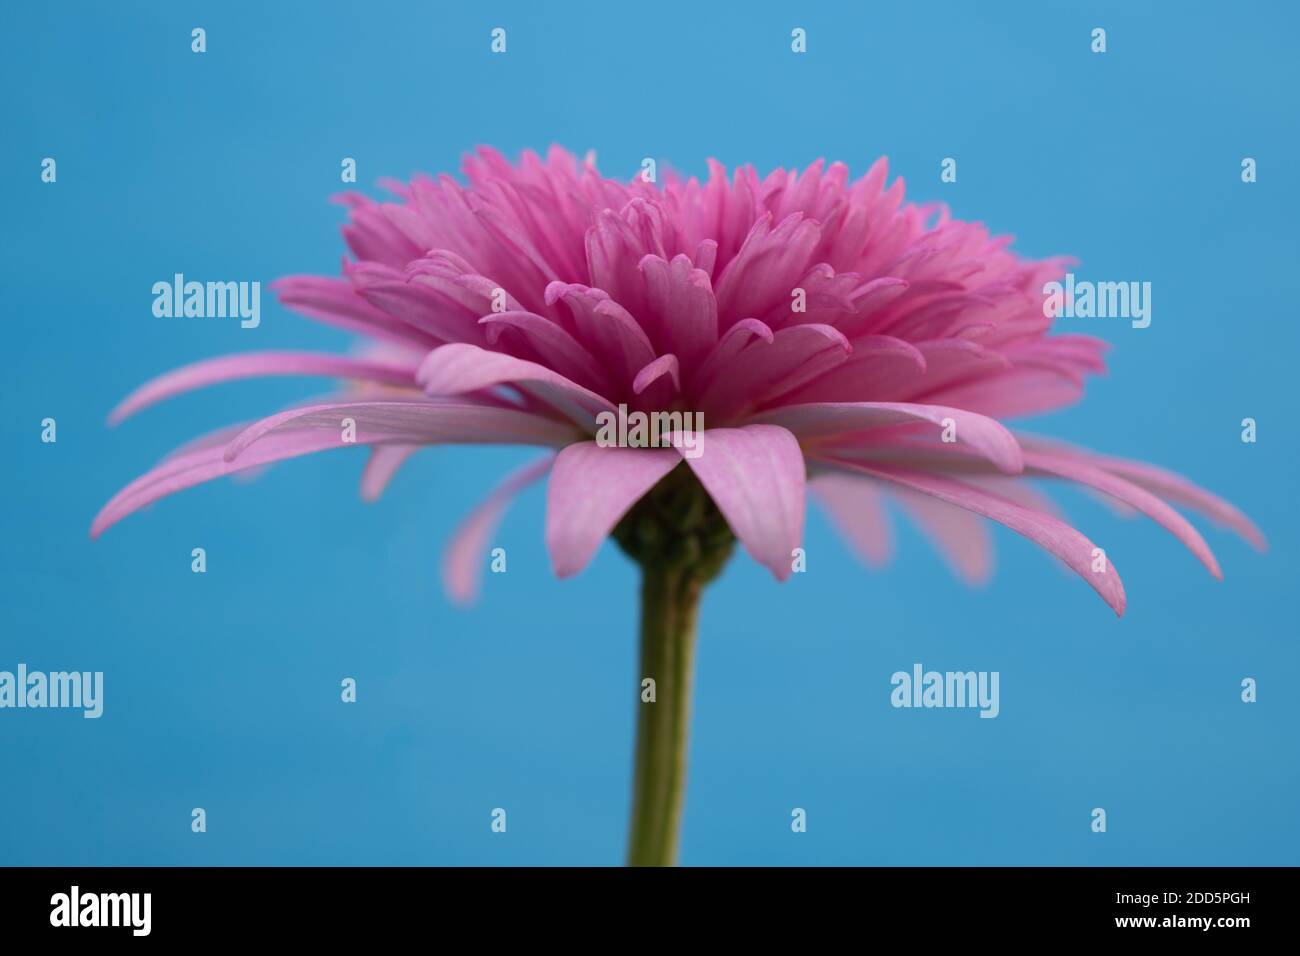 Close-up of vibrant pink chinese aster flower with open petals isolated on a blue plain background and seen from below Stock Photo